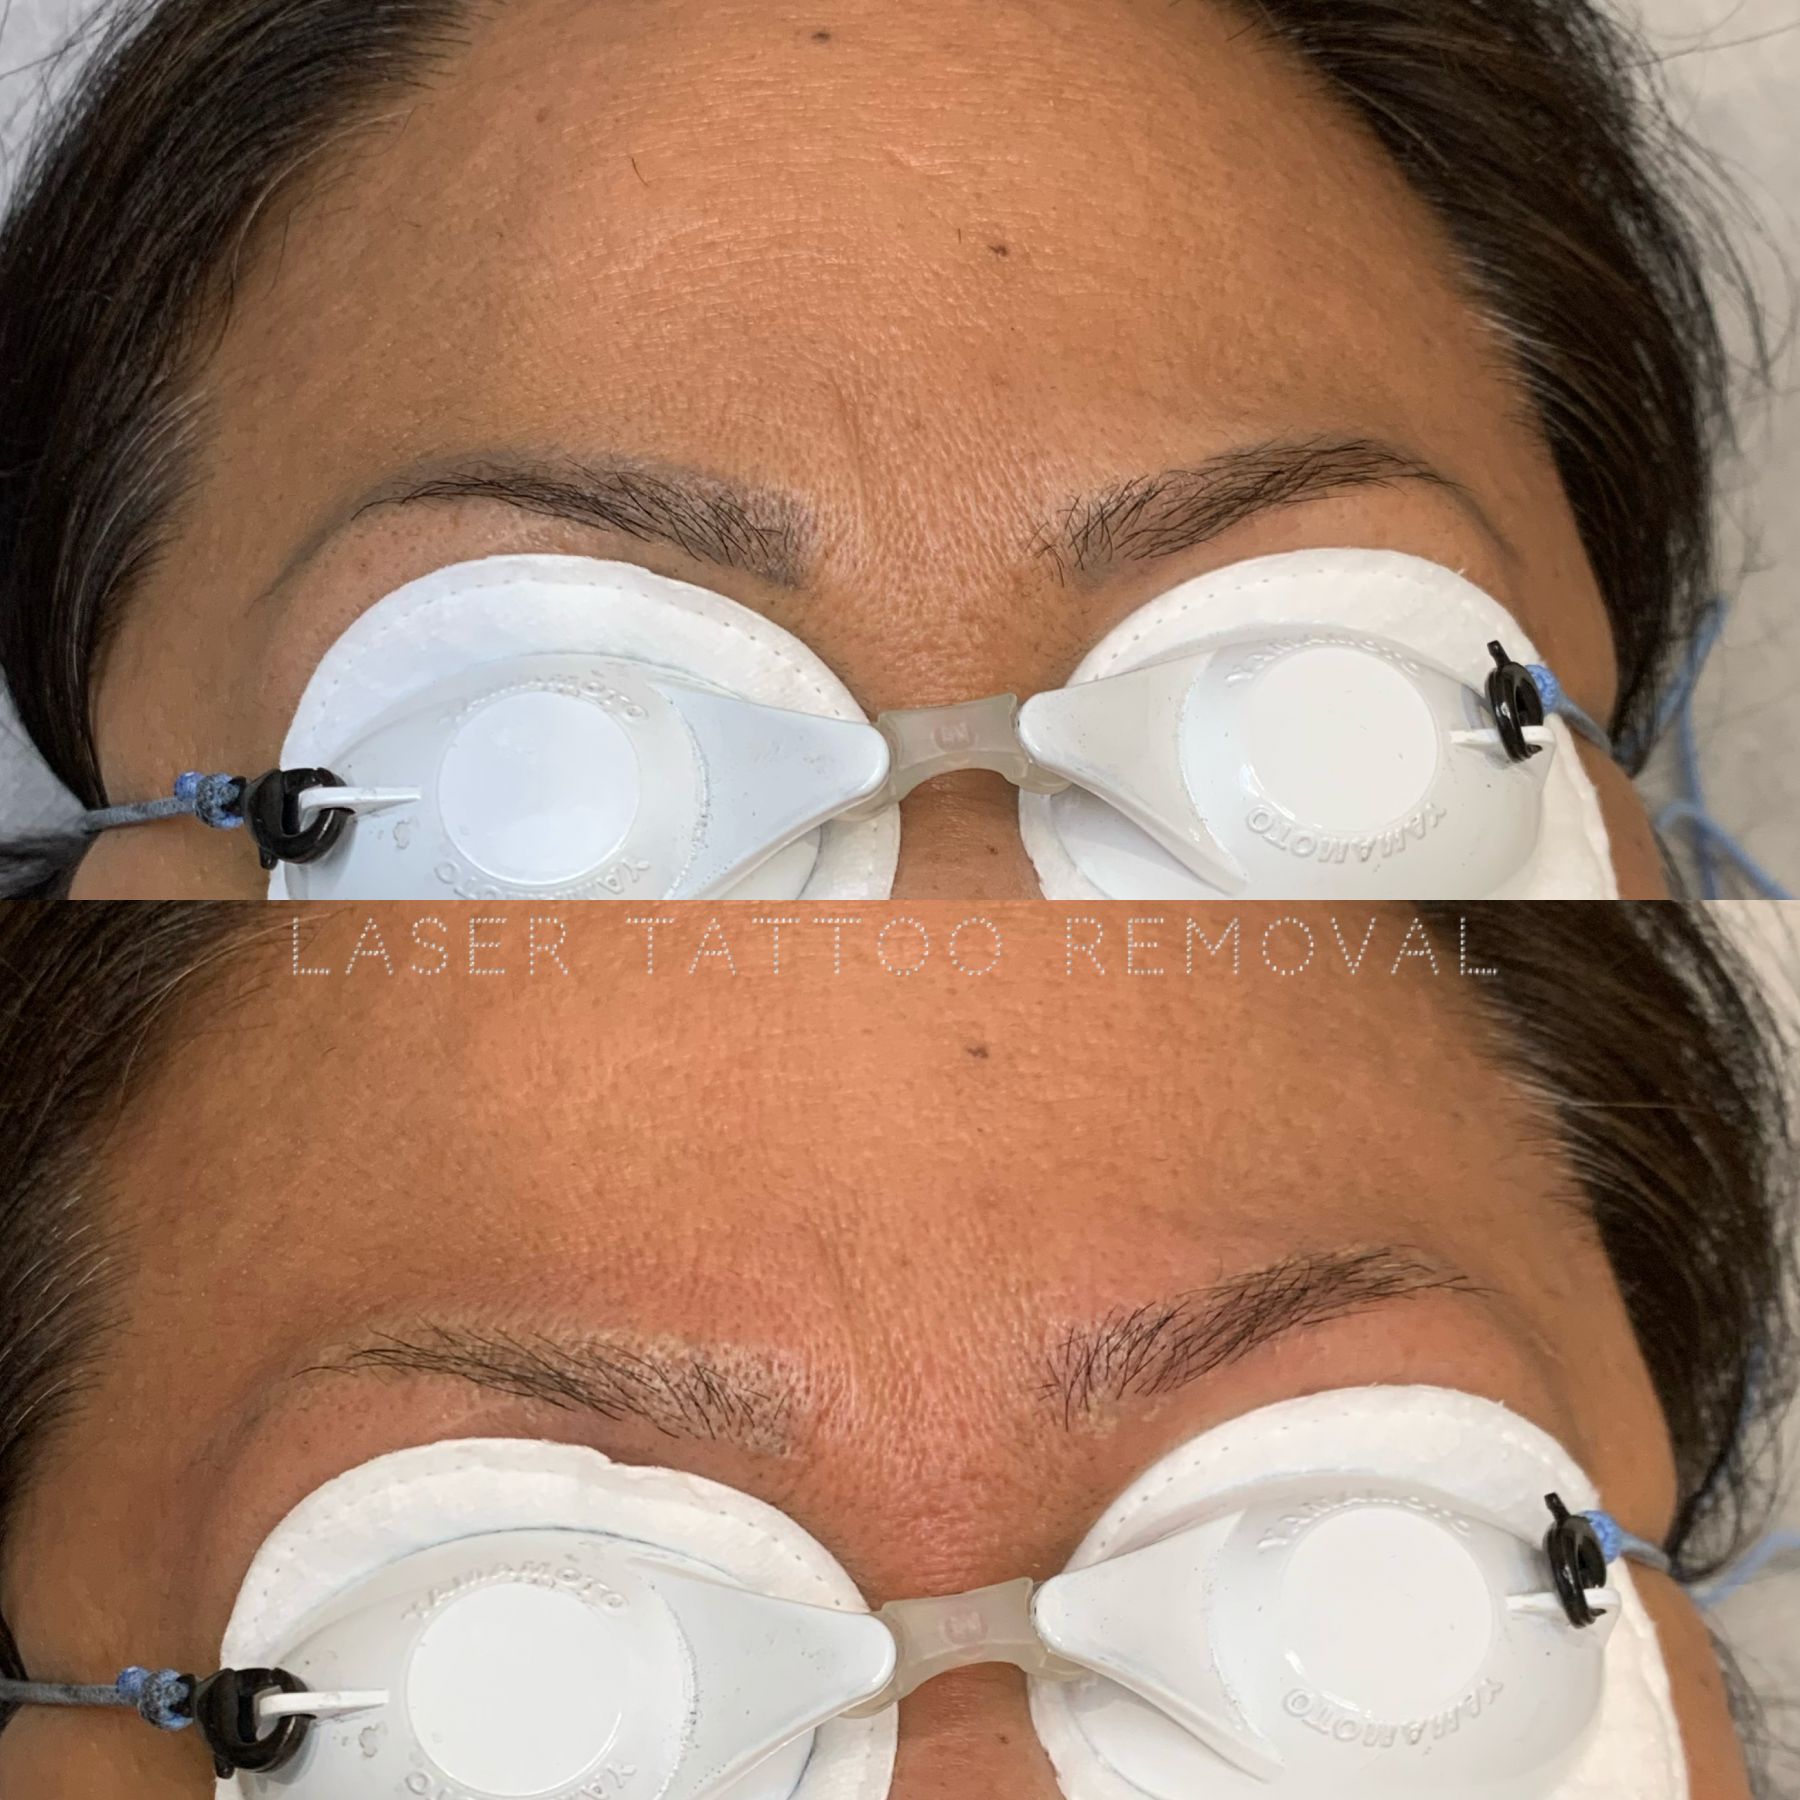 Eye Brow & Permanent Makeup Removal in Austin TX - Austin Tattoo Removal -  Clean Slate Ink